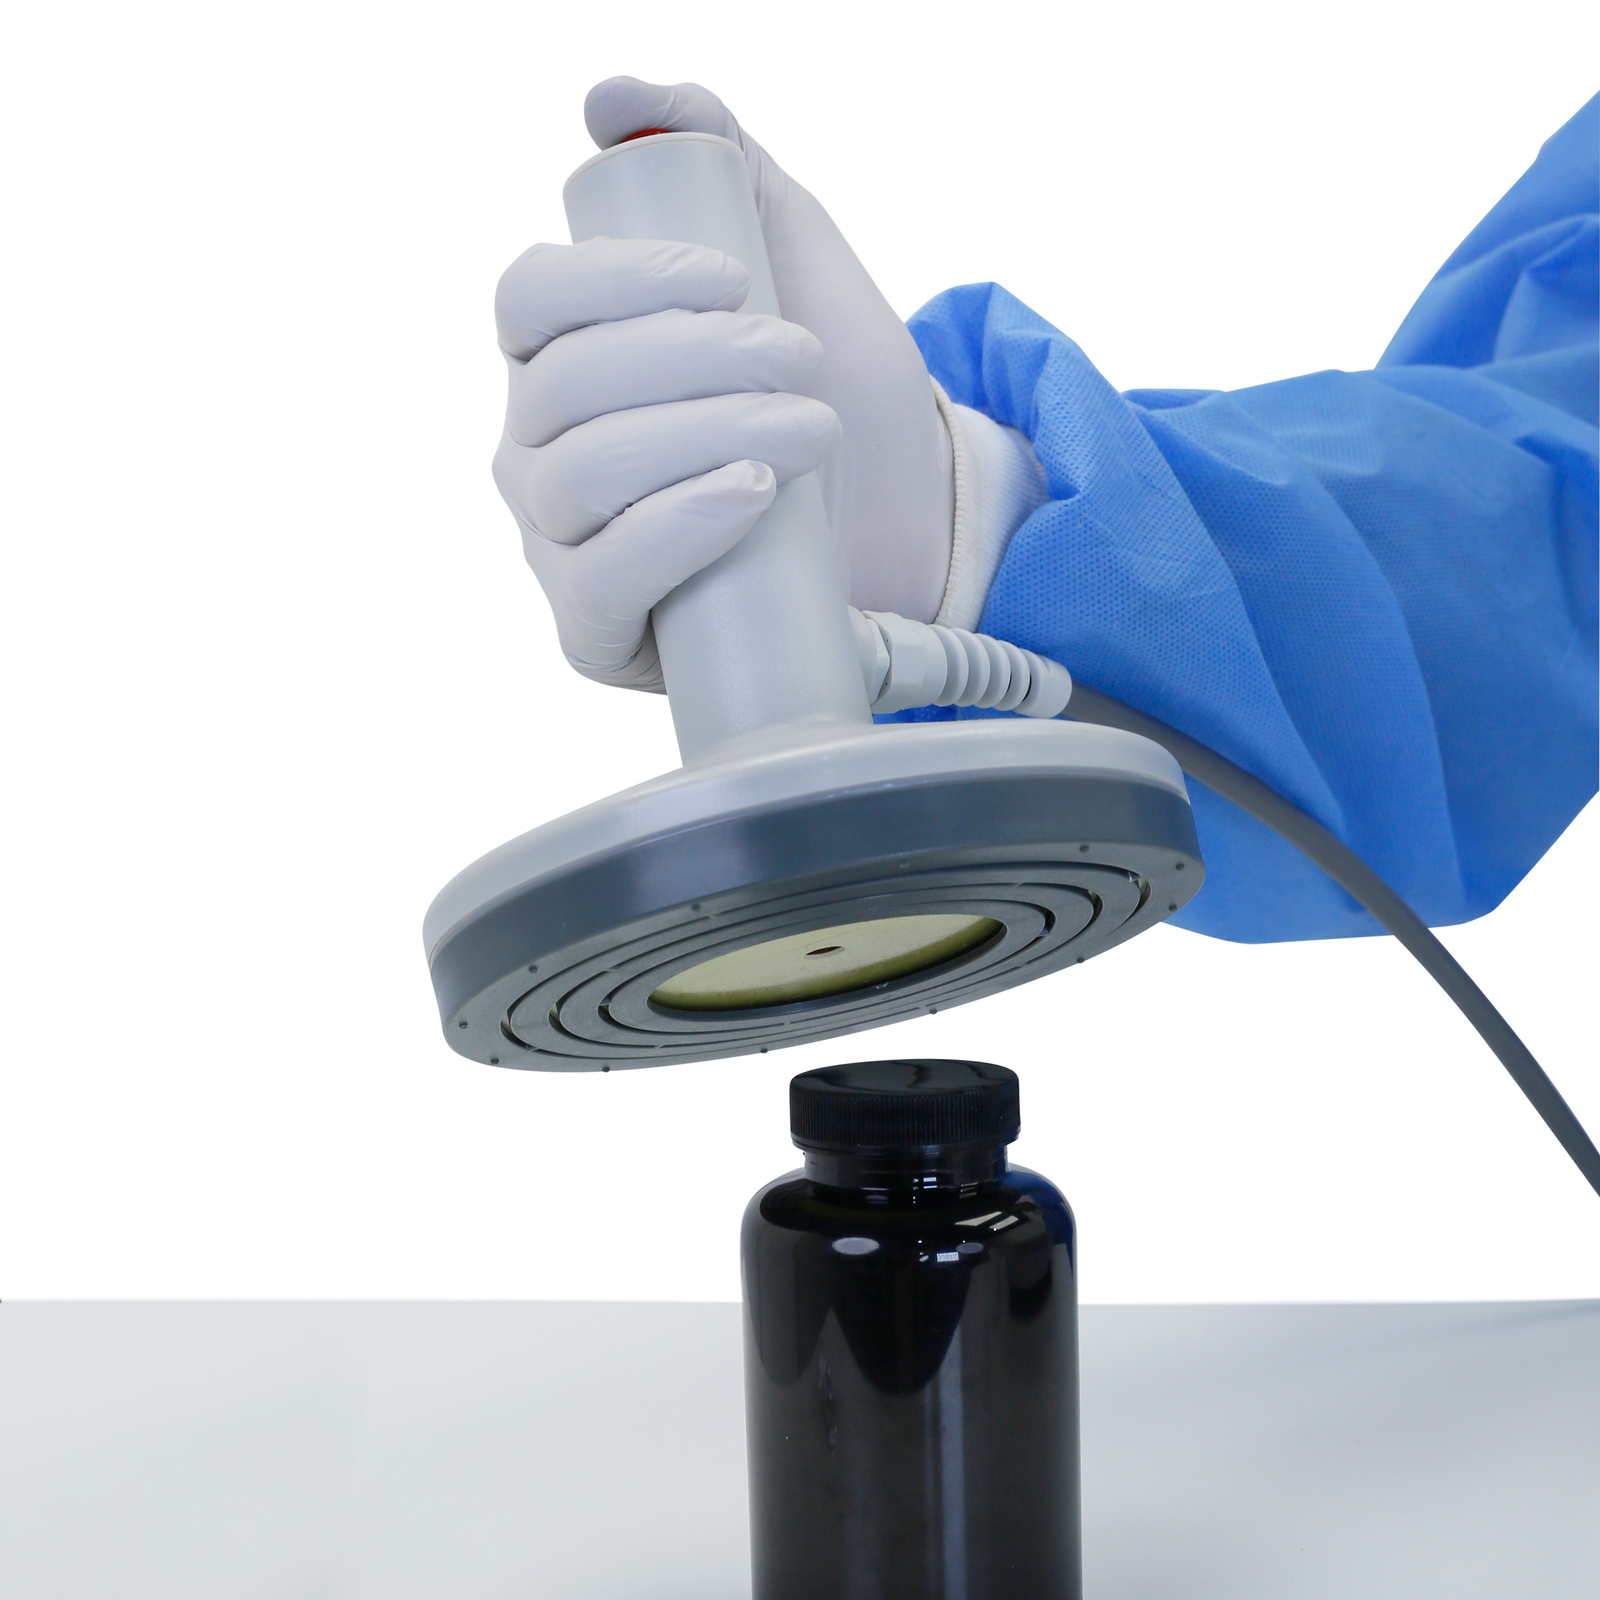 Hand of a person placing the head of the manual induction sealer on top of the plastic cap of a container in order to seal it with an induction liner